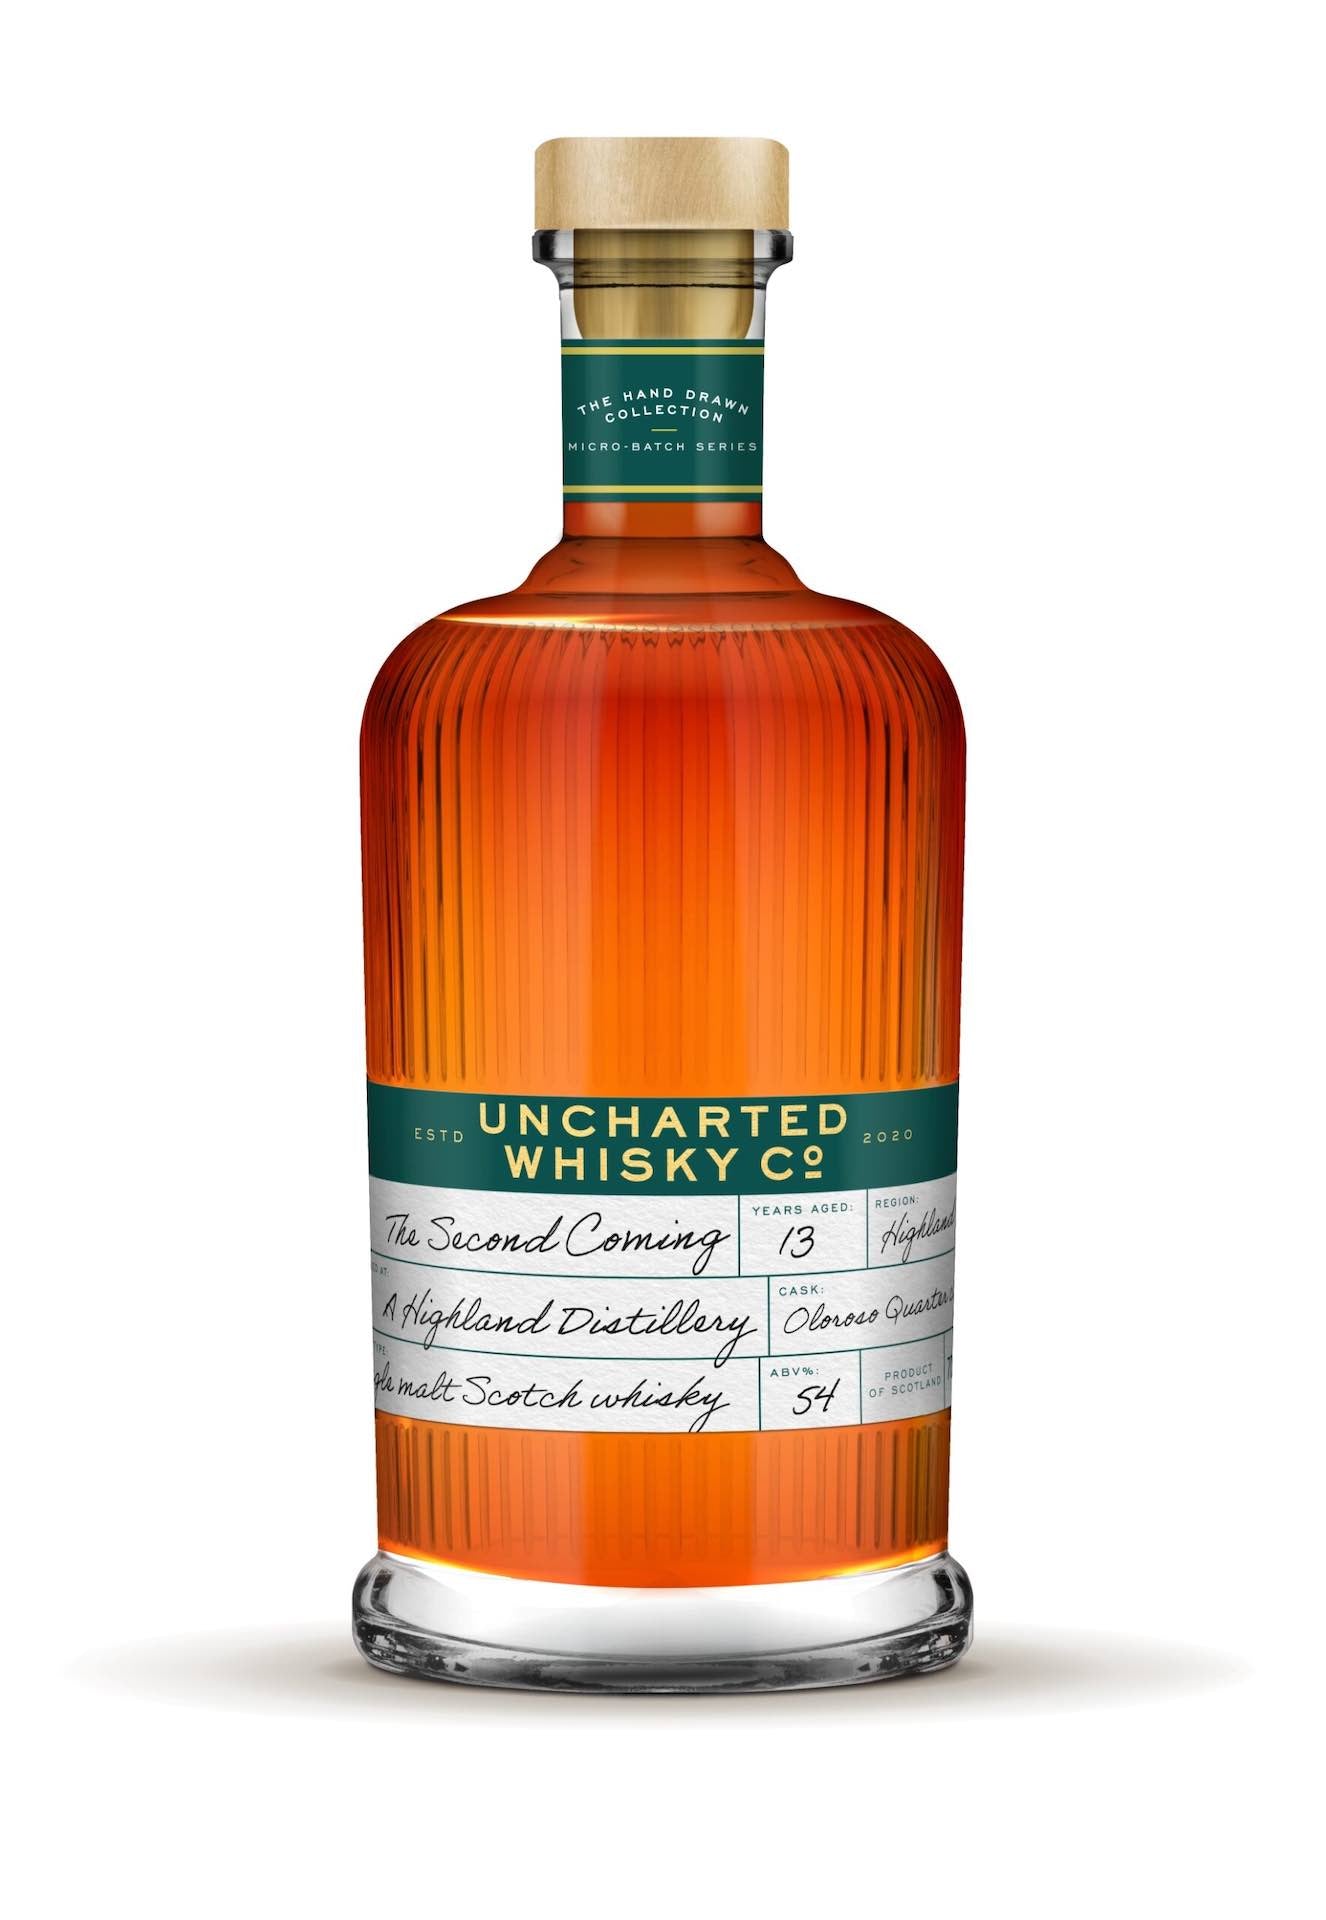 Uncharted Whisky, The Second Coming, Peated Highland Malt 13 Year Old